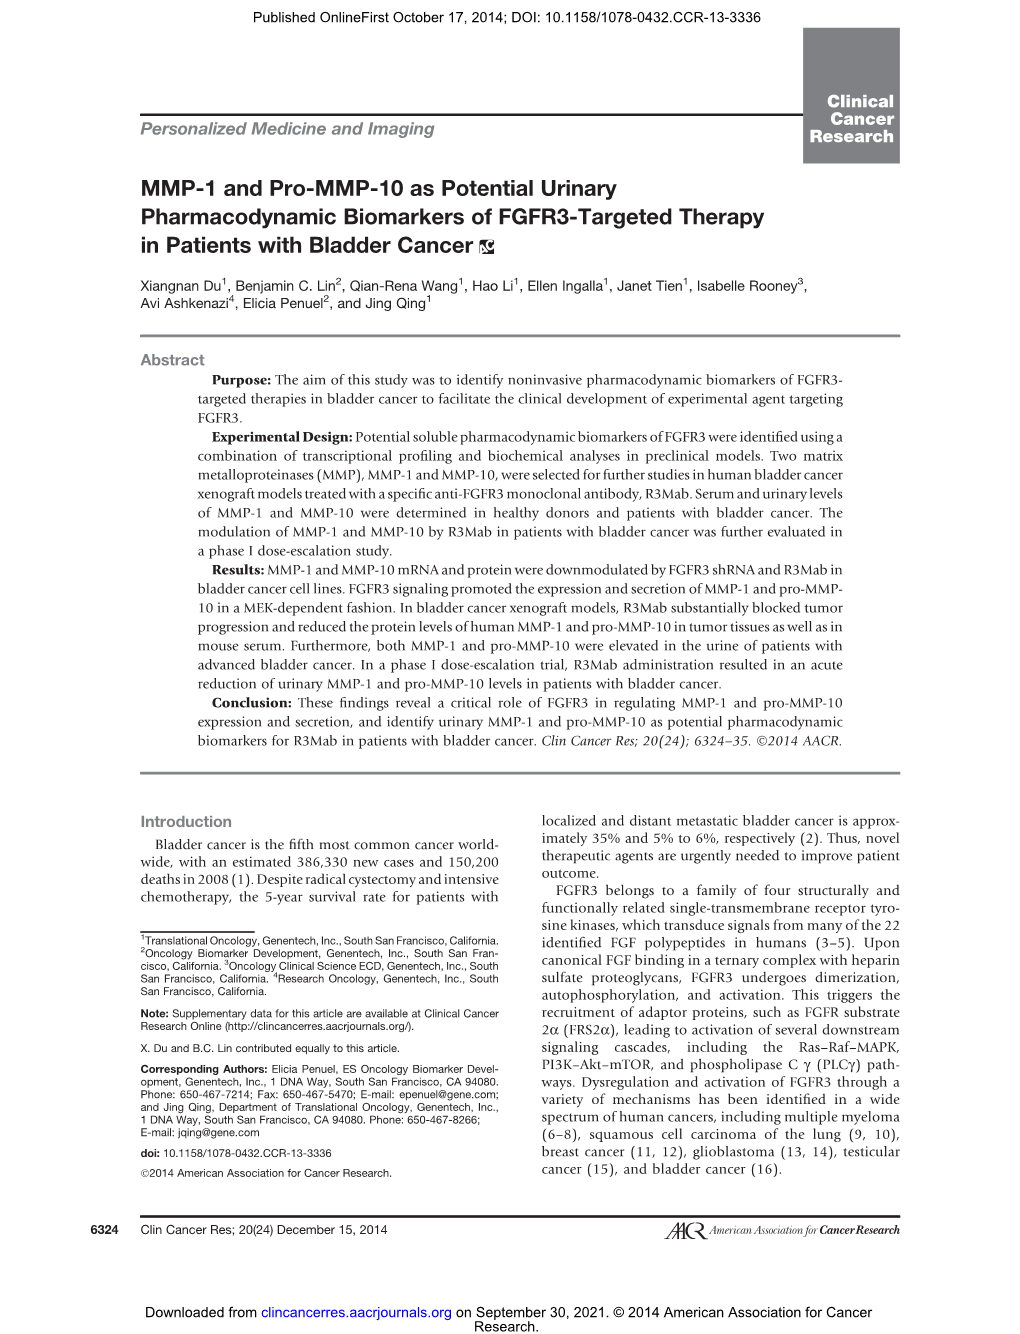 MMP-1 and Pro-MMP-10 As Potential Urinary Pharmacodynamic Biomarkers of FGFR3-Targeted Therapy in Patients with Bladder Cancer